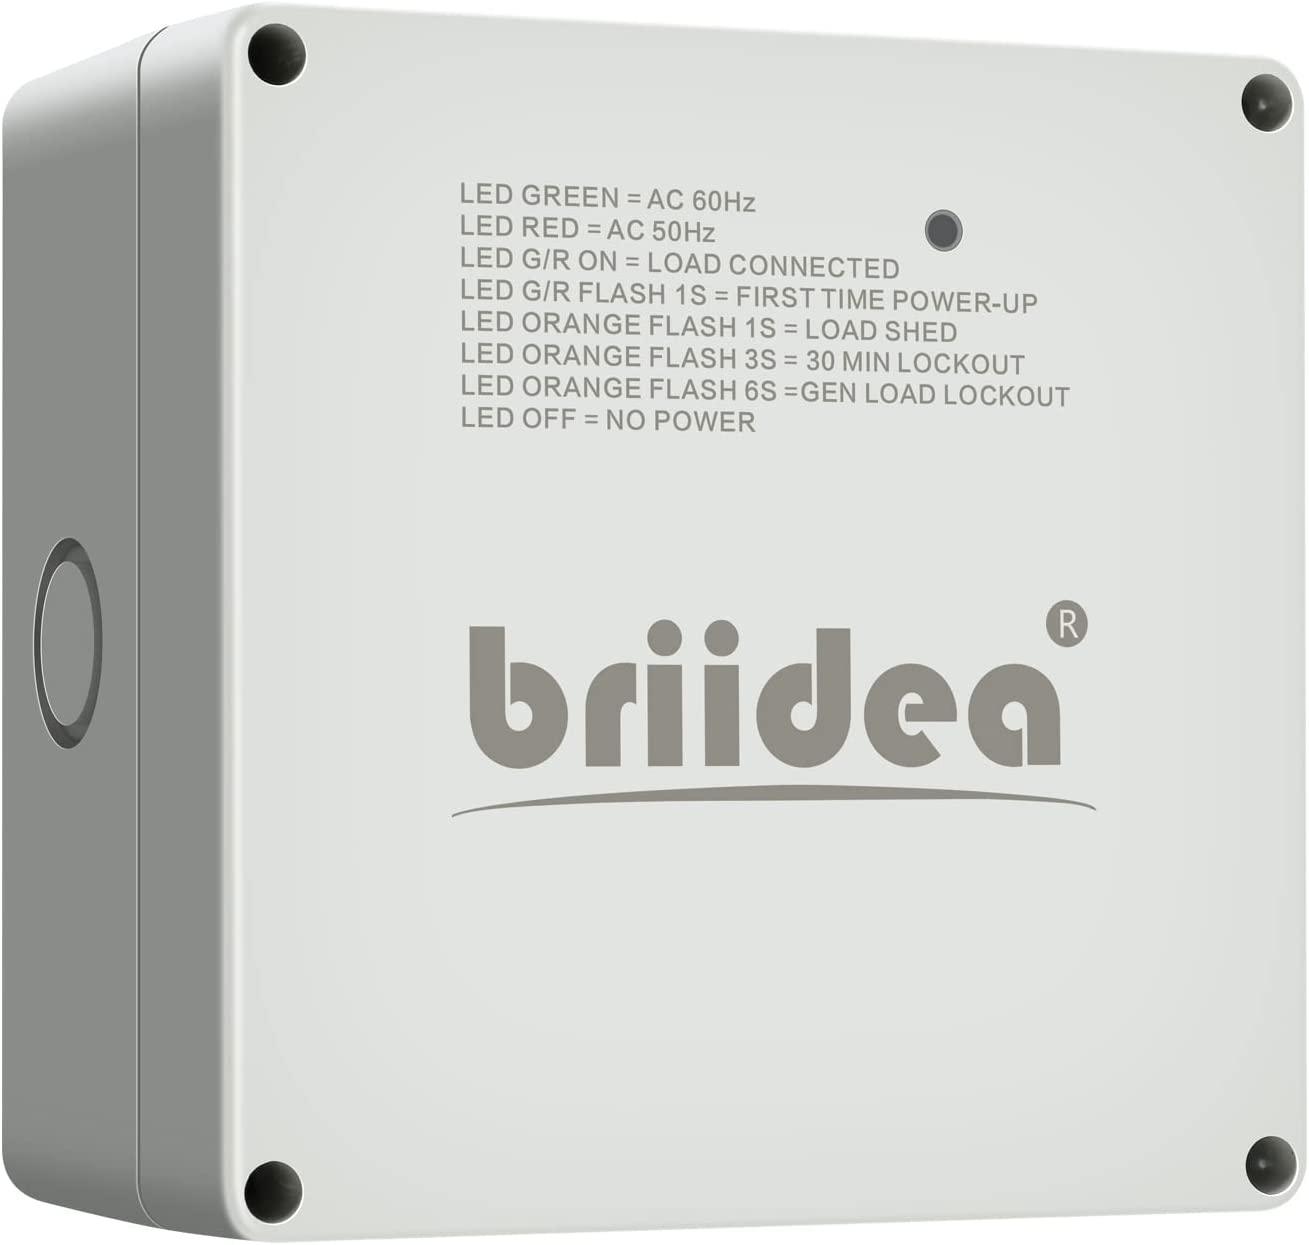 50 Amp Smart Management Module (SMM), Briidea Load Management Device to Protect Generator from Overload, Gray - briidea